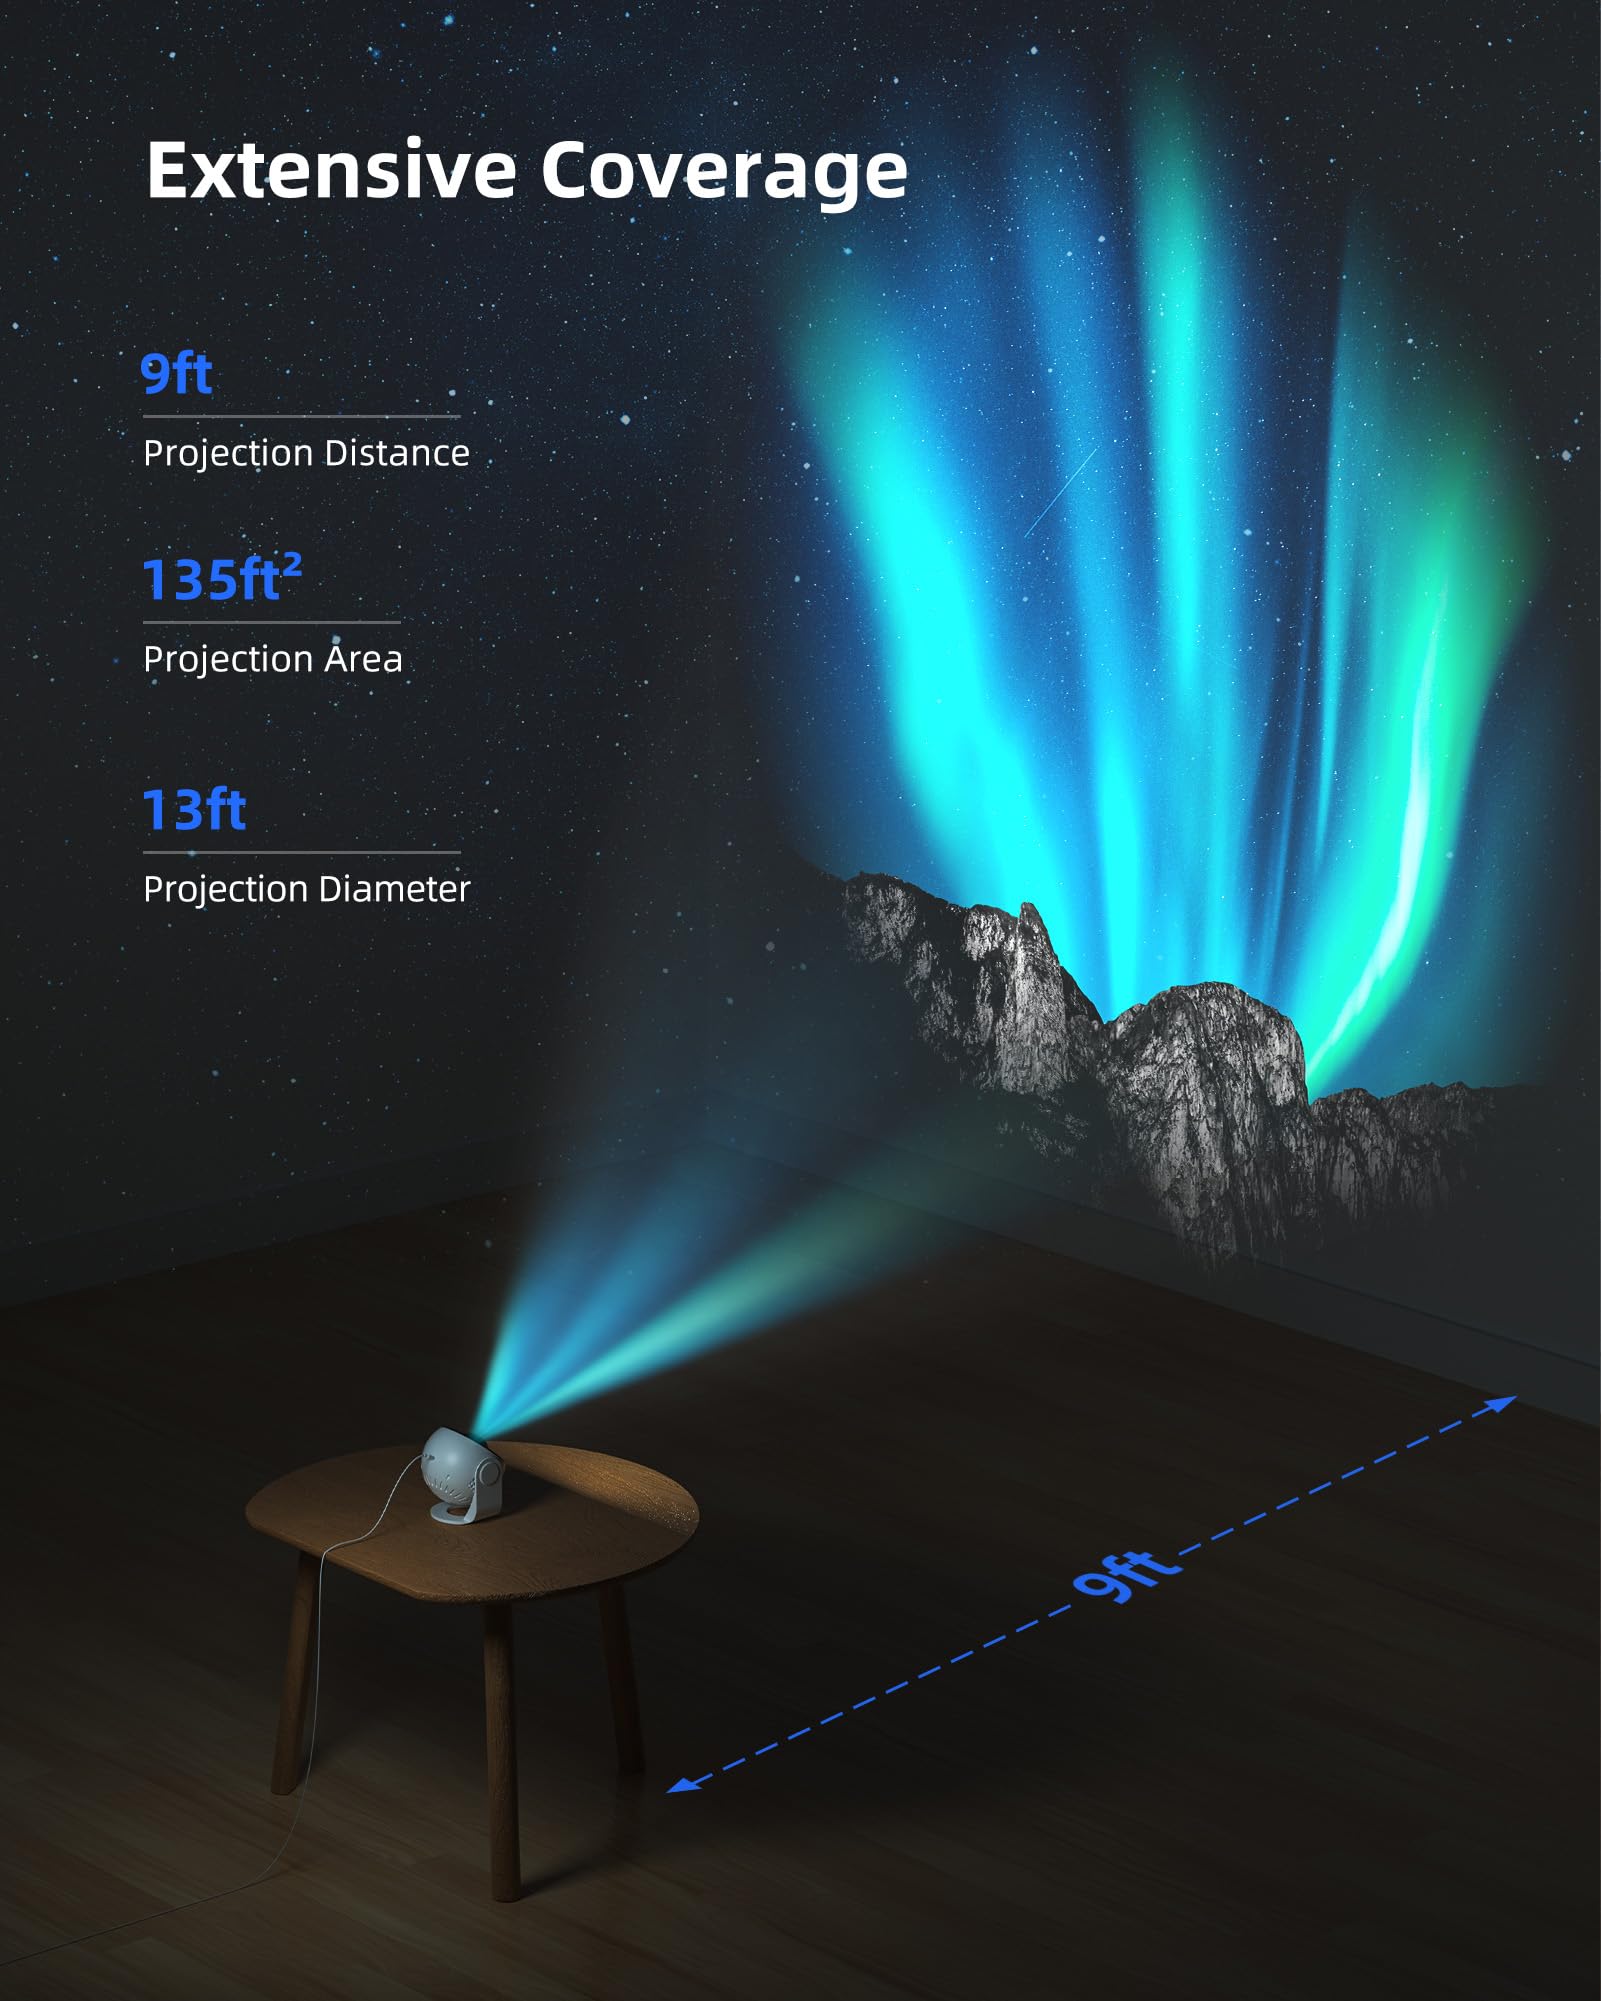 Lytmi 13 in 1 Planetarium Galaxy Projector, 8K Star Projector with Timer, Nebula Star Night Light for Kids Adults, Bedroom Ceiling Decor, Home Theater, Birthday, Party, Holiday Gift